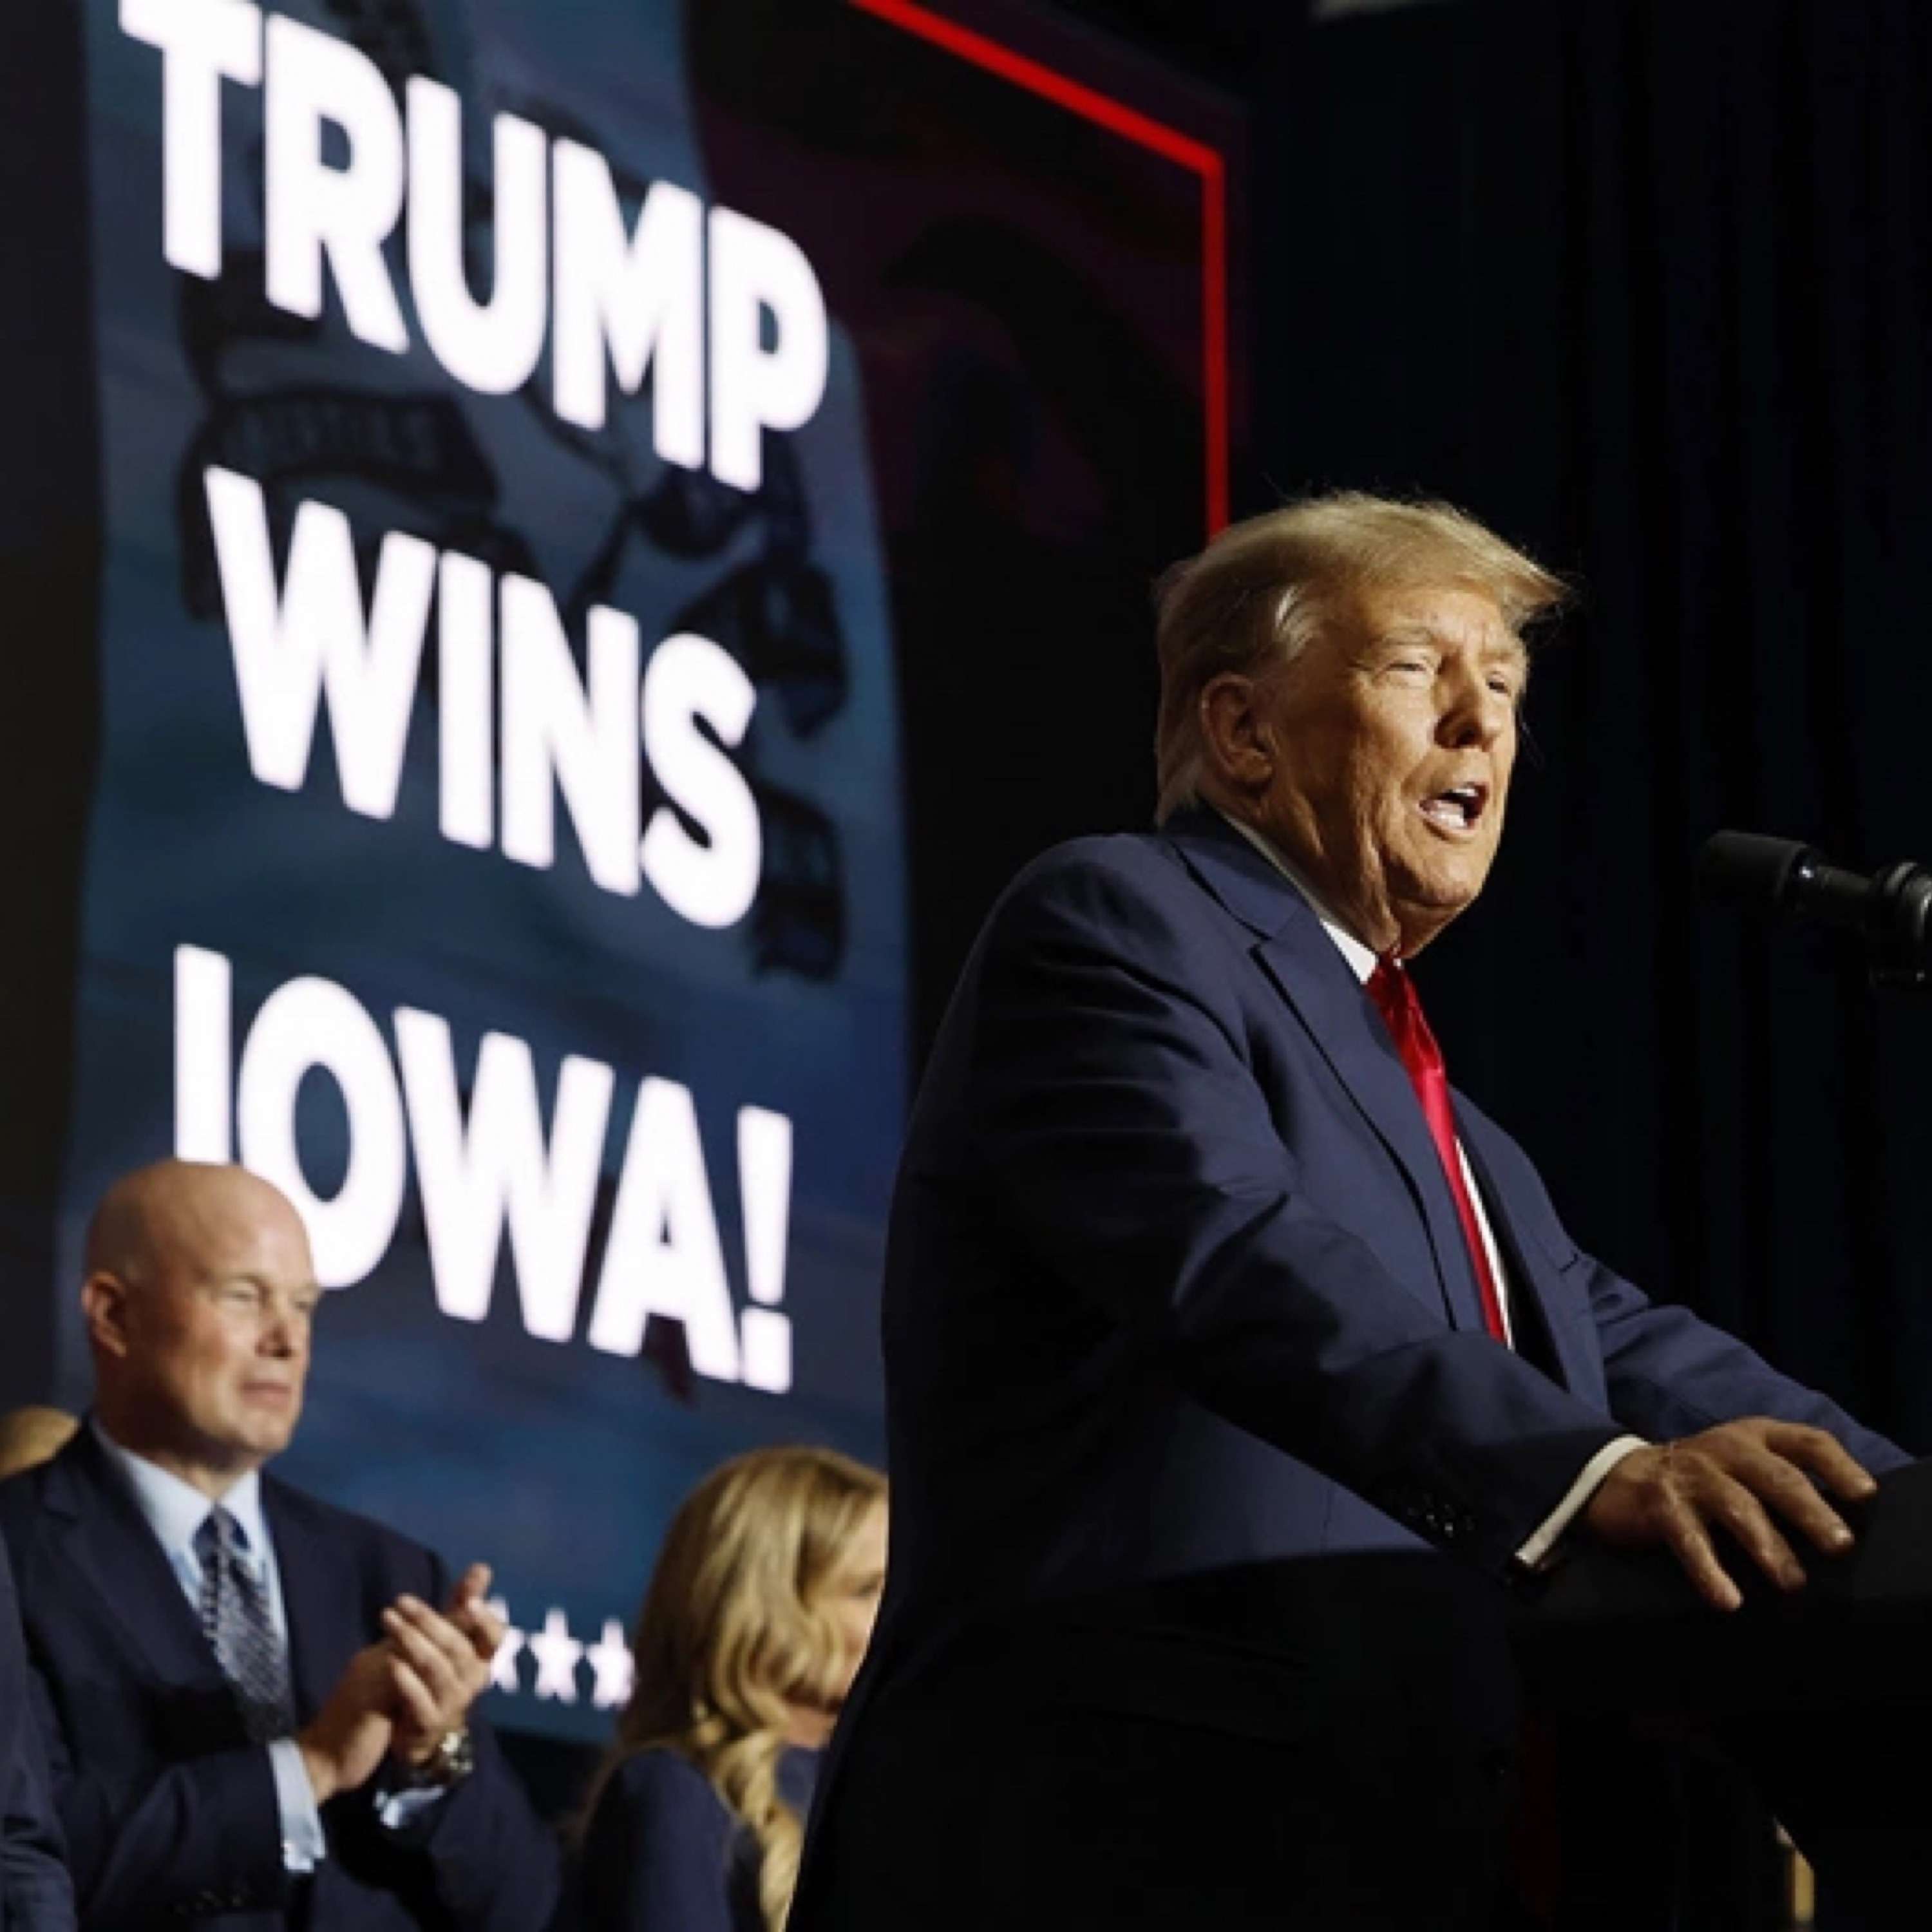 Trump Wins in Iowa, Vivek Suspends Campaign, Tiny Miracle Baby's Journey, Joyce Carol Oates Calls Bible 'A Work of Fiction'